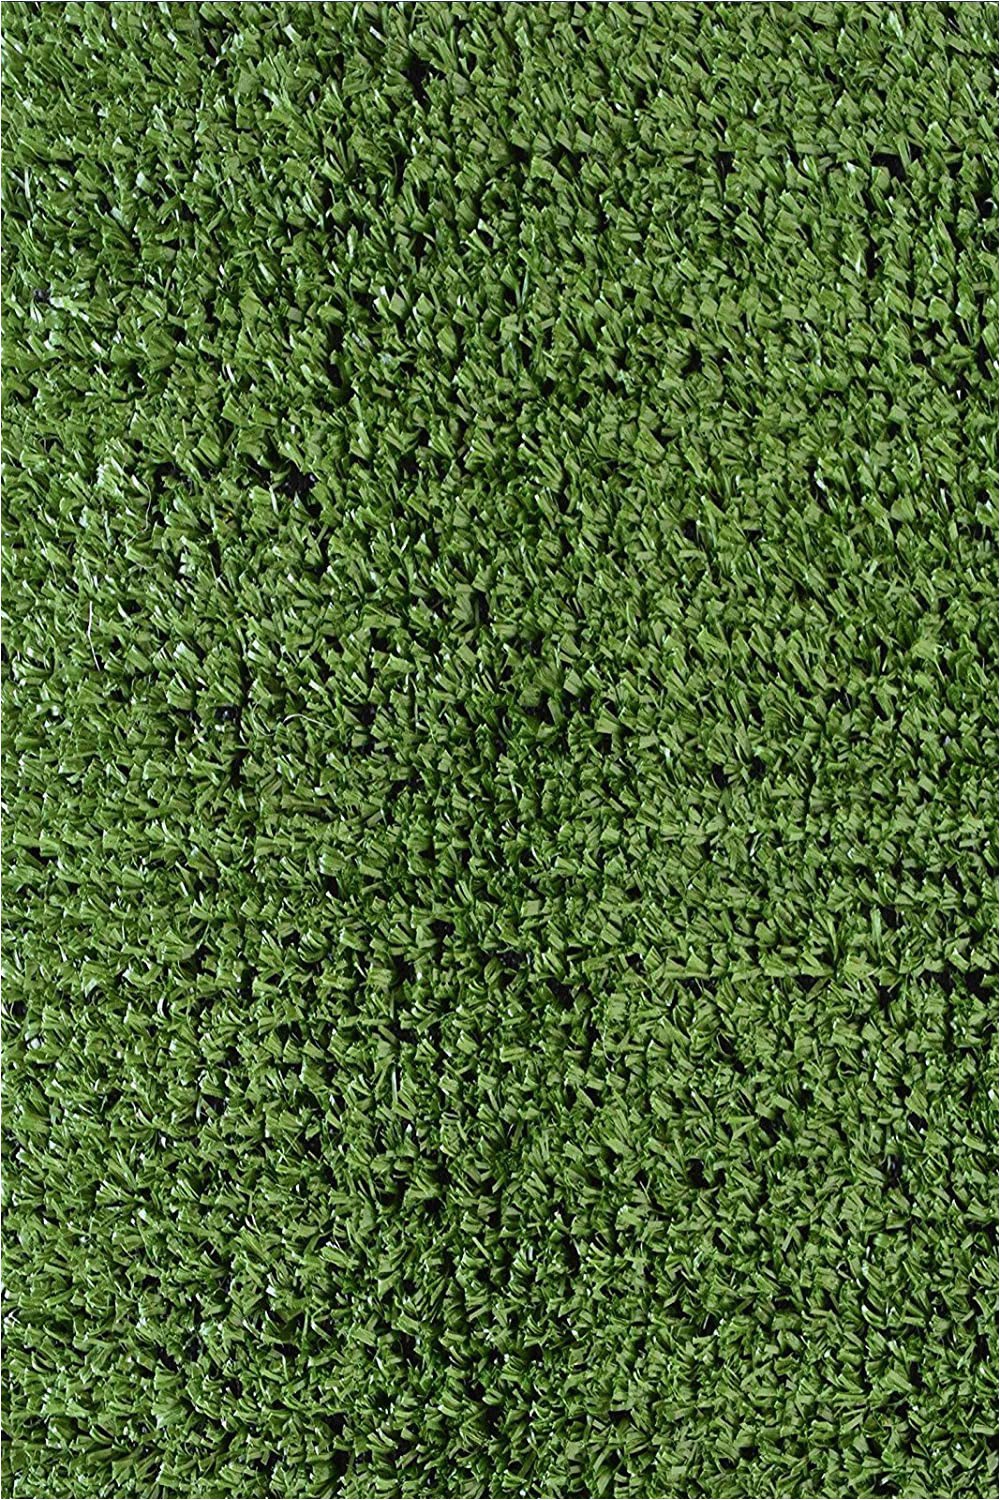 Indoor Outdoor Grass area Rug Heavy Duty Artificial Grass Turf Indoor Outdoor Green Grass Color 2 X3 area Rug for Dogs Patios Porches with A Marine Backing